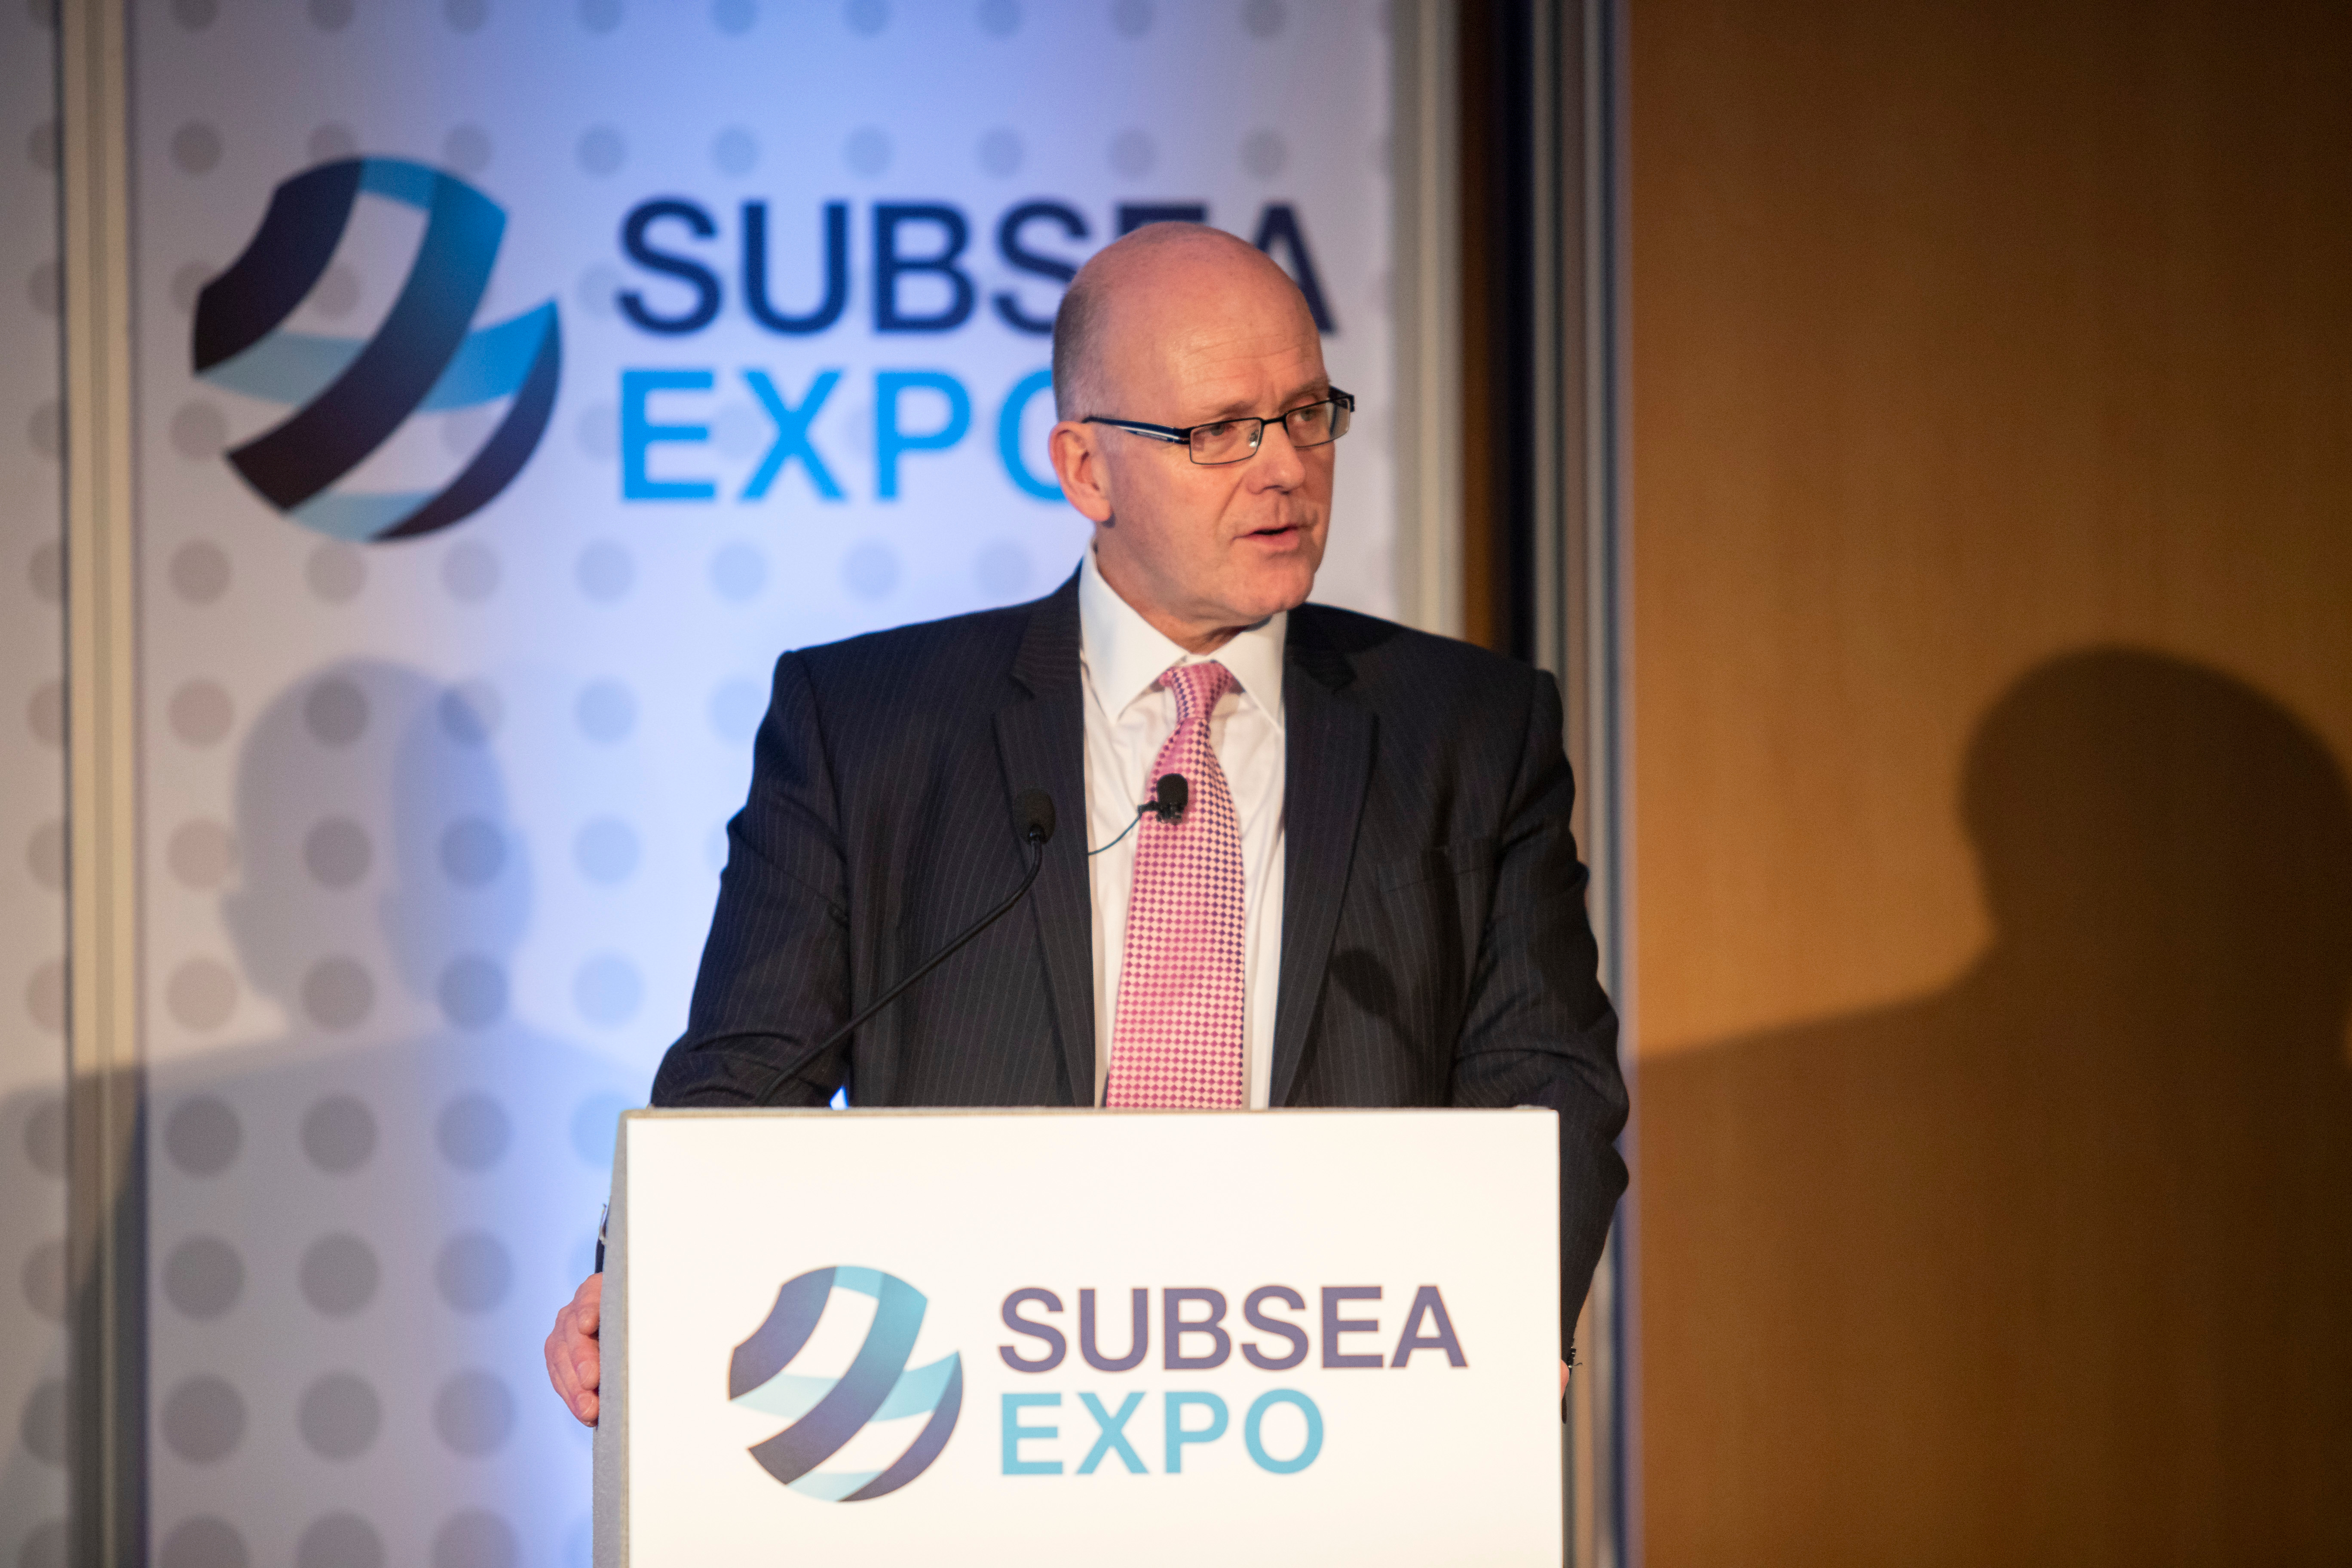 Friday 5th February 2019, Aberdeen, Scotland. Attracting over 5,000 delegates and around 150 exhibitors, Subsea Expo is the worlds largest subsea exhibition and conference held in Aberdeen